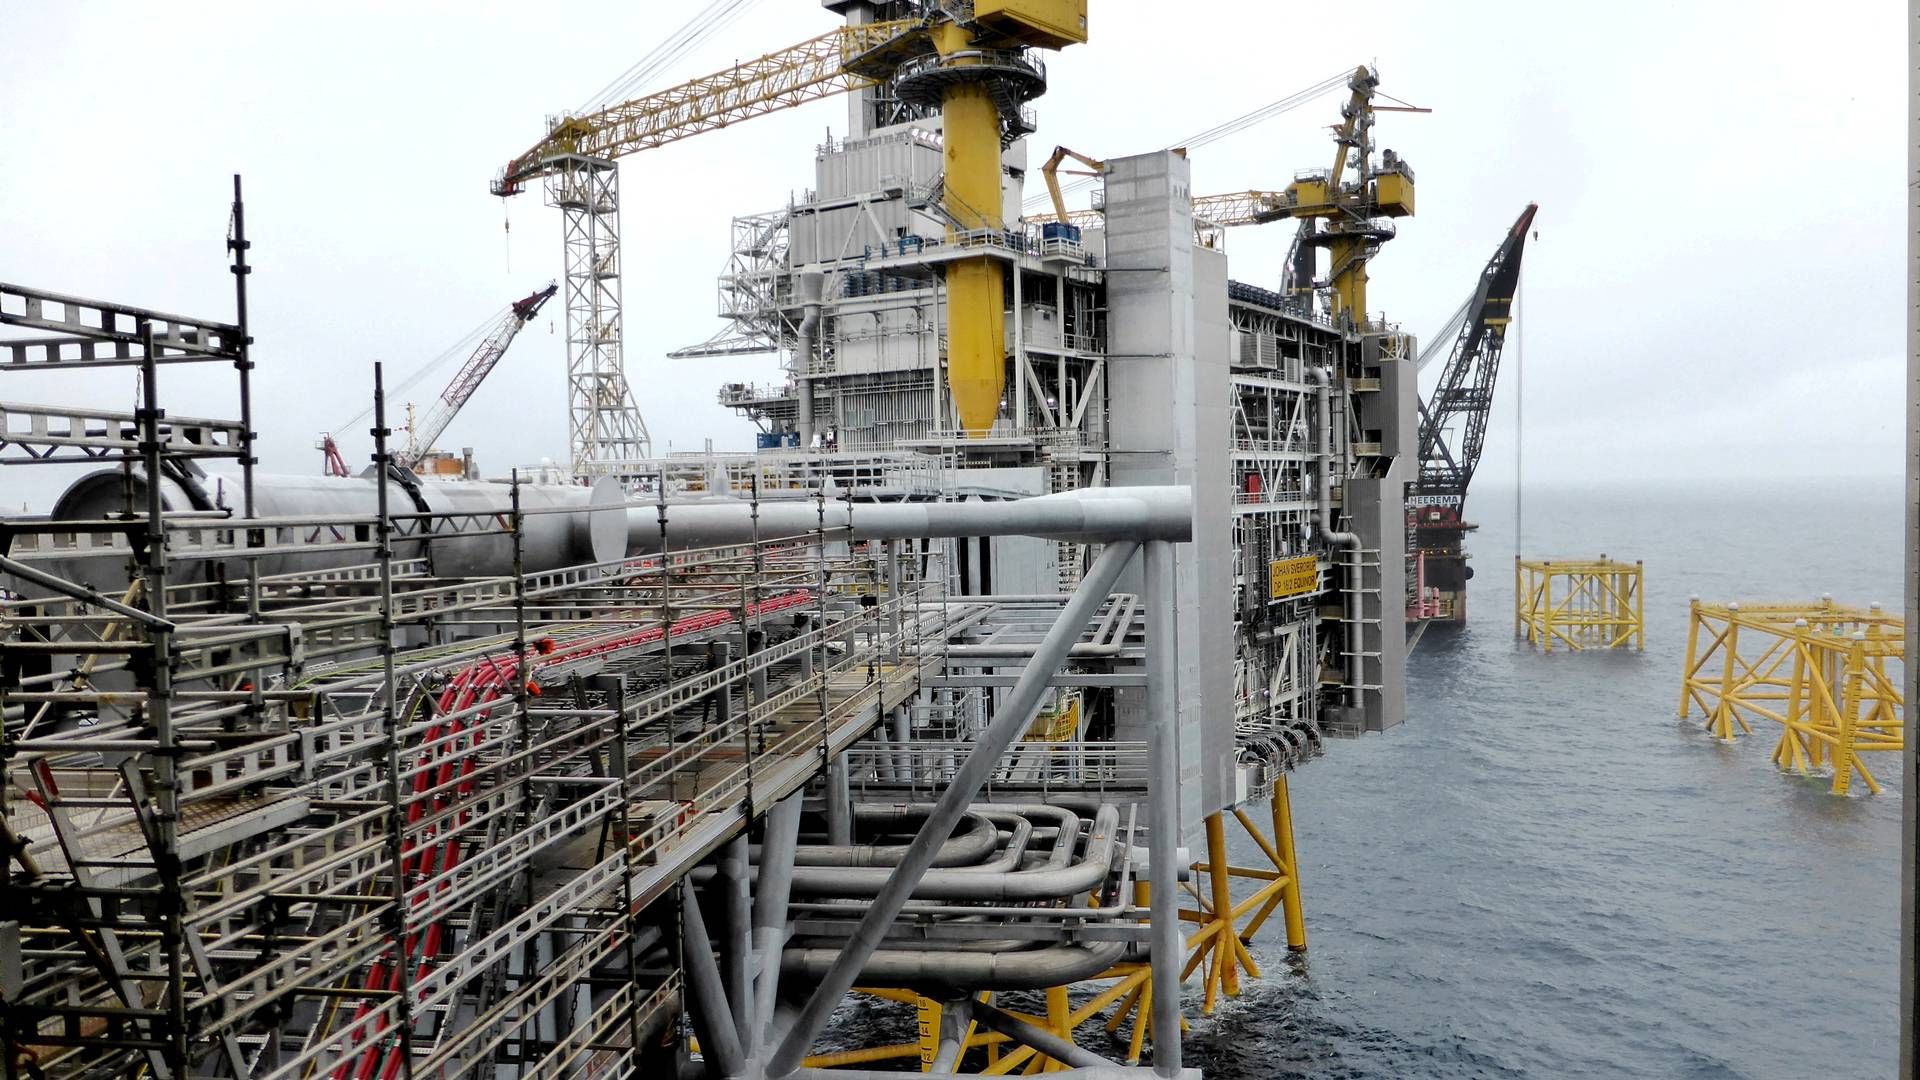 The recoverable resources are estimated at more than 300 million barrels of oil for phases 1 and 2, with the estimate for phase 1 being 245 million barrels. | Photo: Nerijus Adomaitis